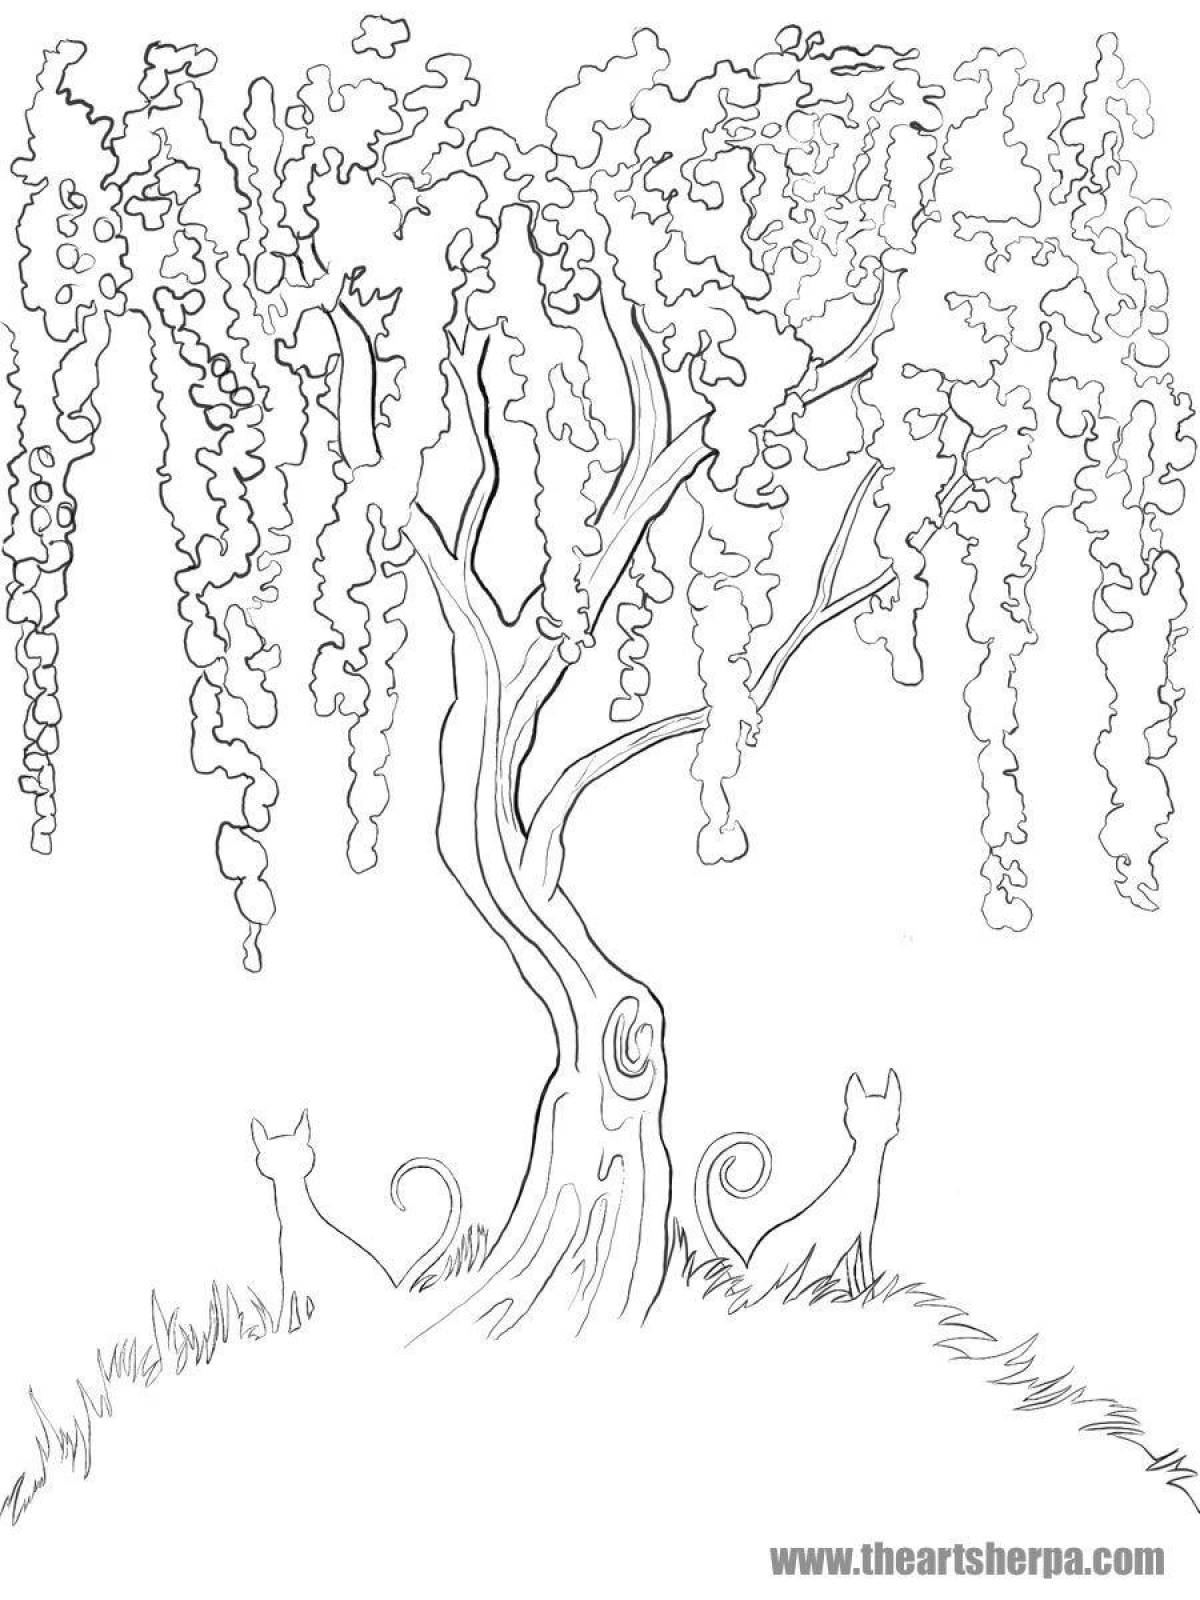 Magic willow coloring book for kids